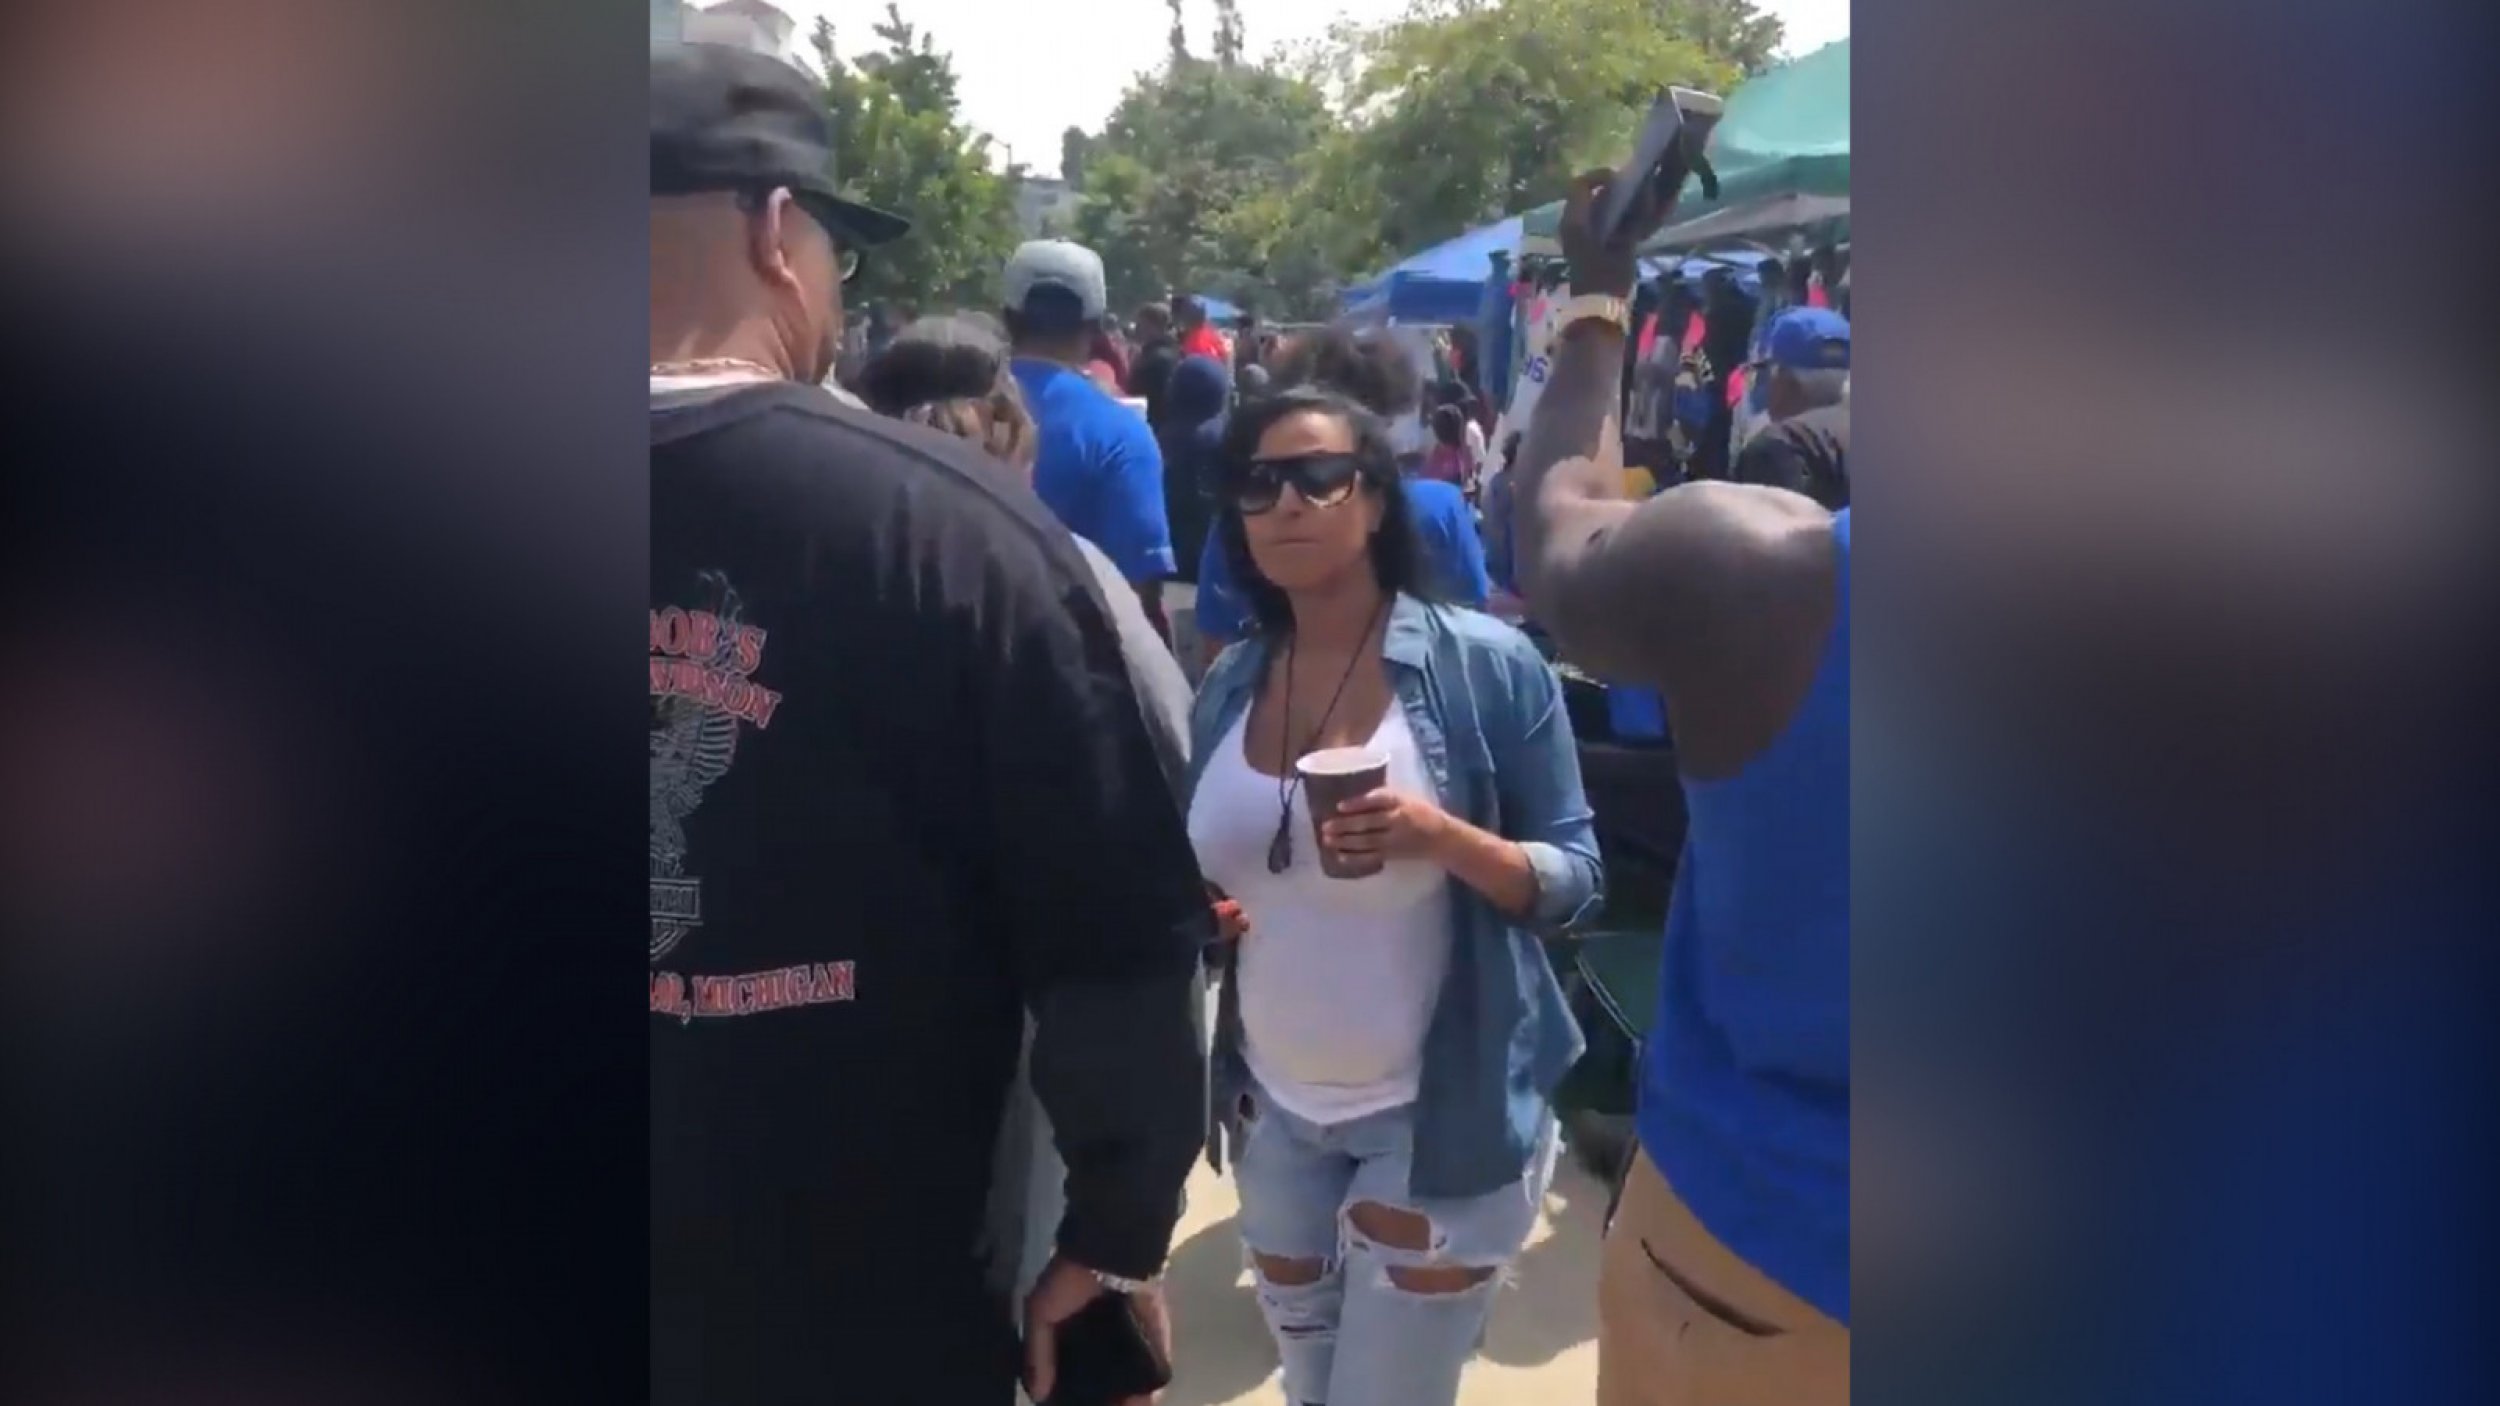 Massive BBQing While Black Event Held In Park Where White Woman Called Cops On Black Family BBQ